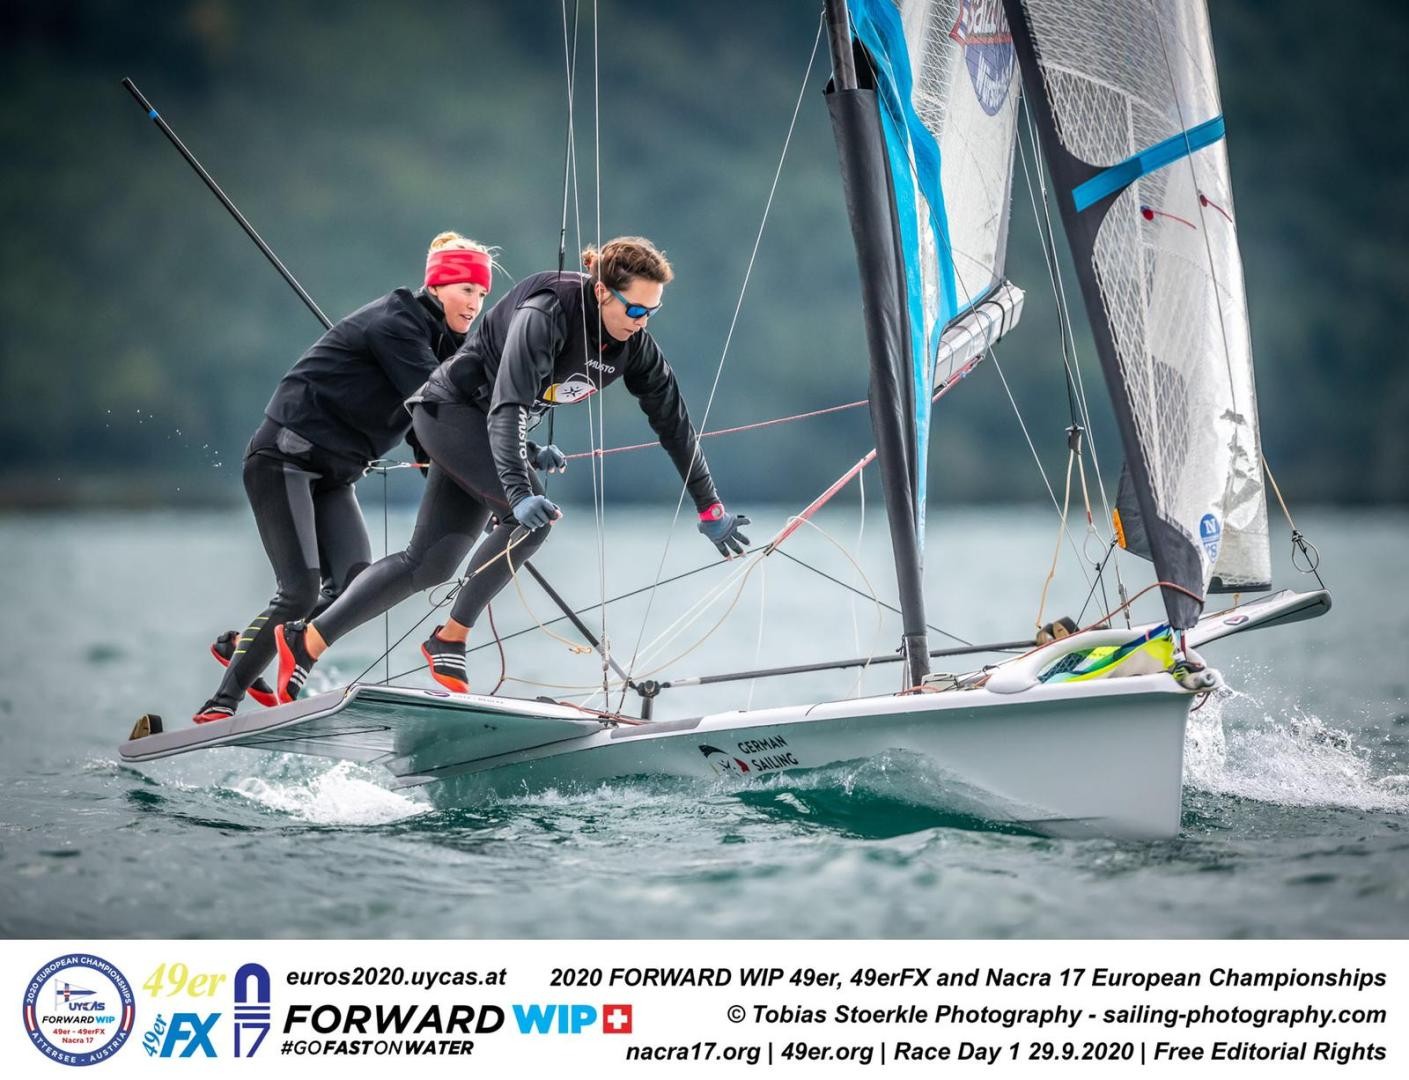 Double 9er victory for Germany, Italy wins the Nacra 17s